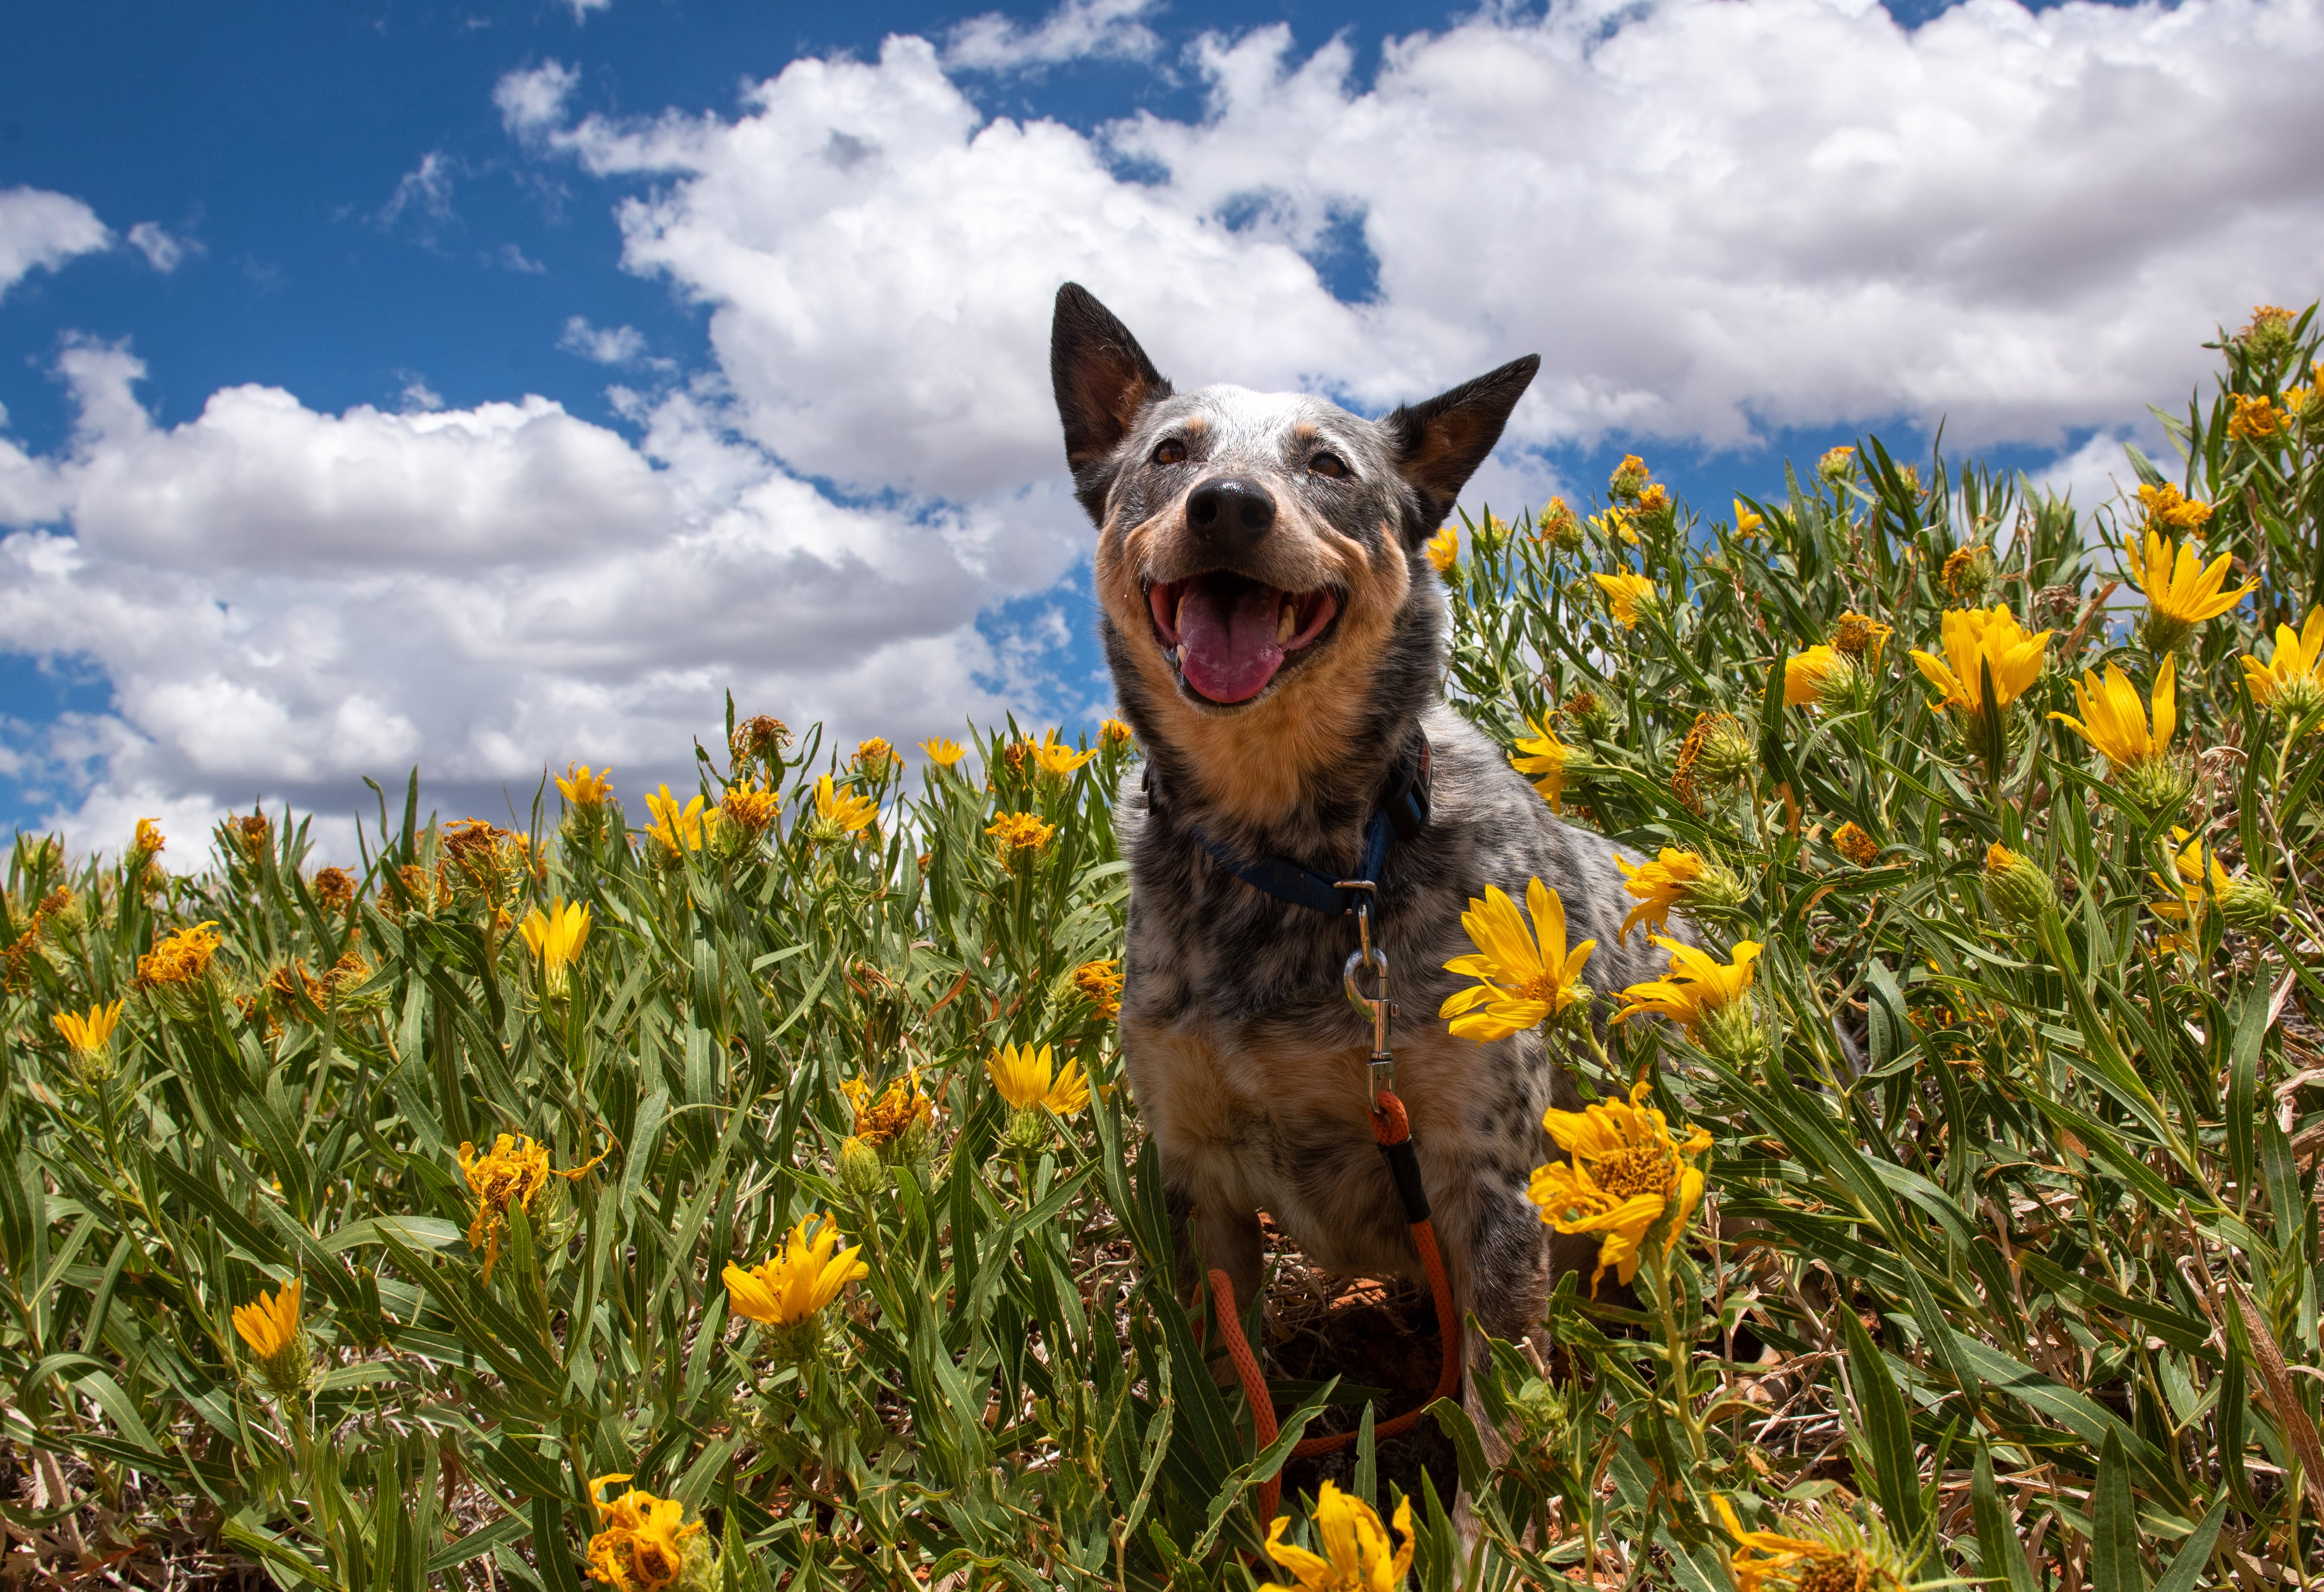 Happy dog in a field of bright yellow flowers in front of a blue sky